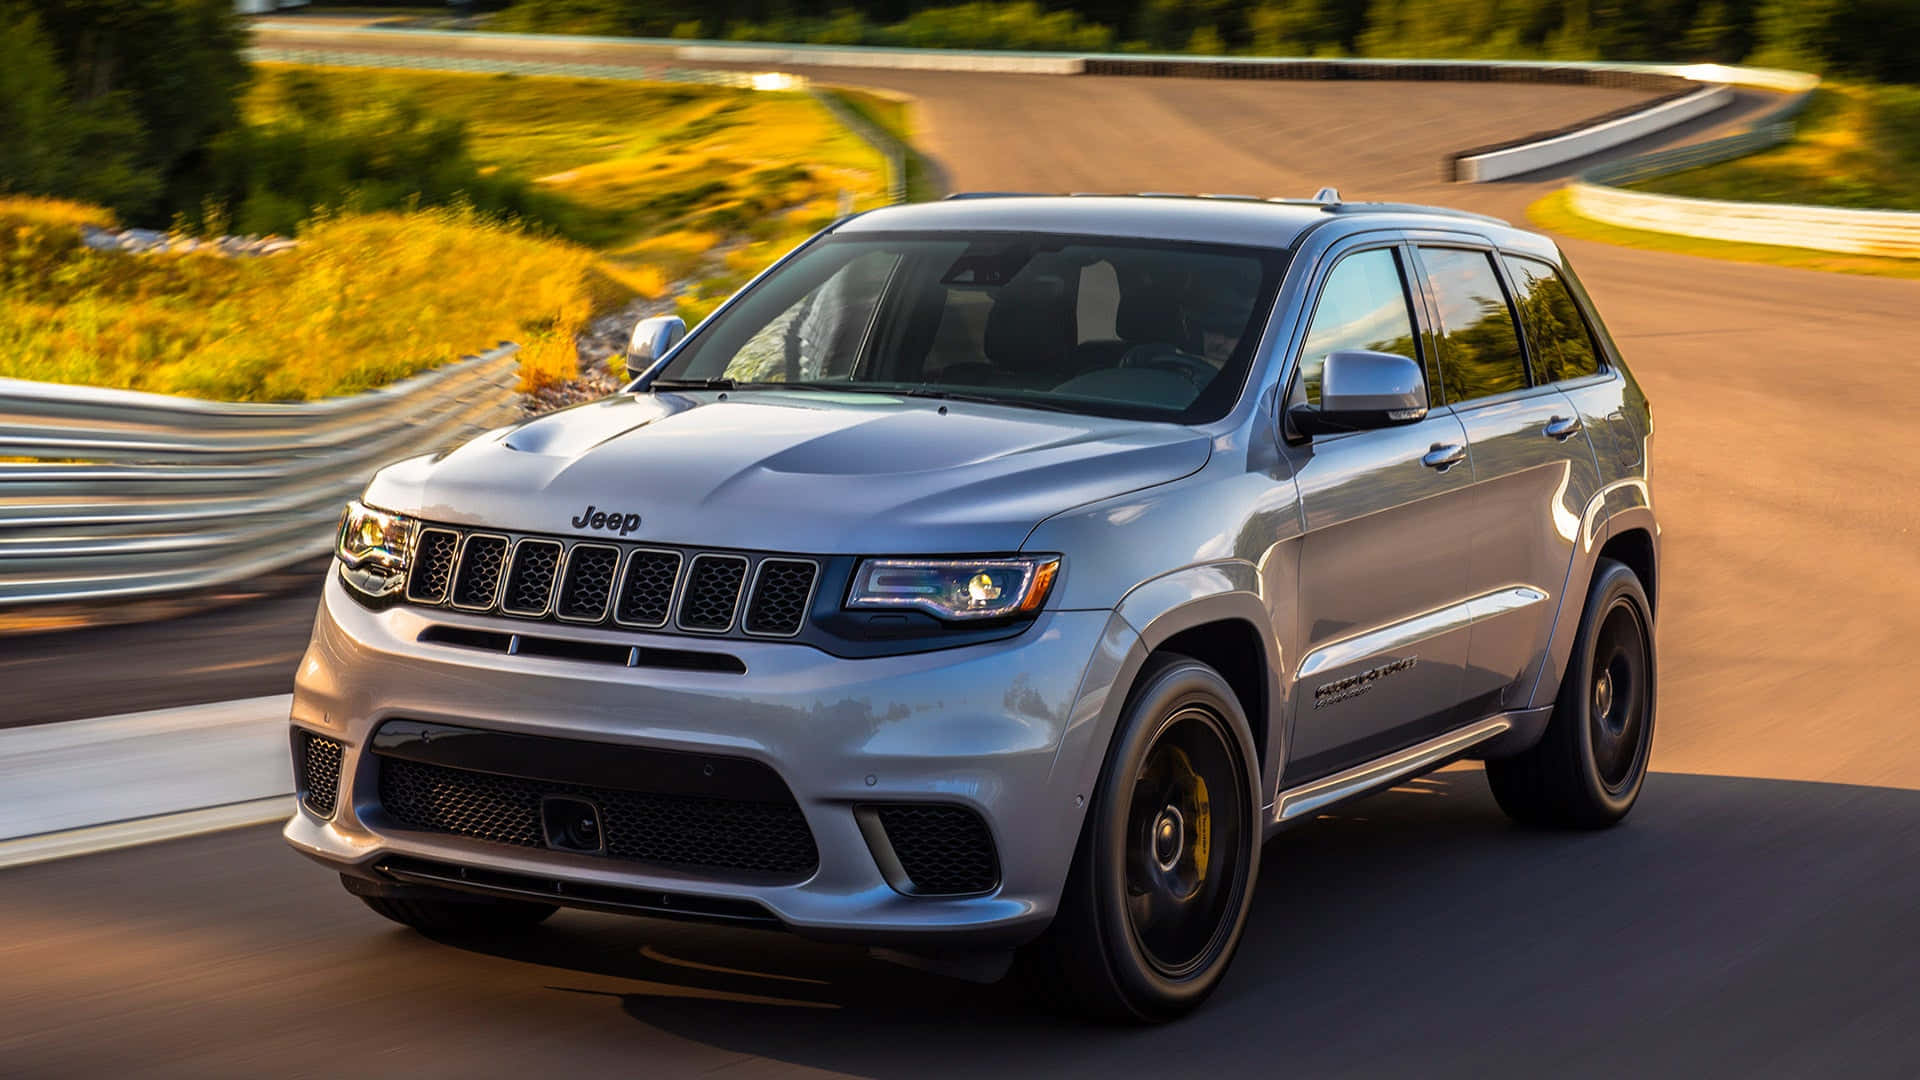 The 2019 Jeep Grand Cherokee Is Driving On A Curve Wallpaper